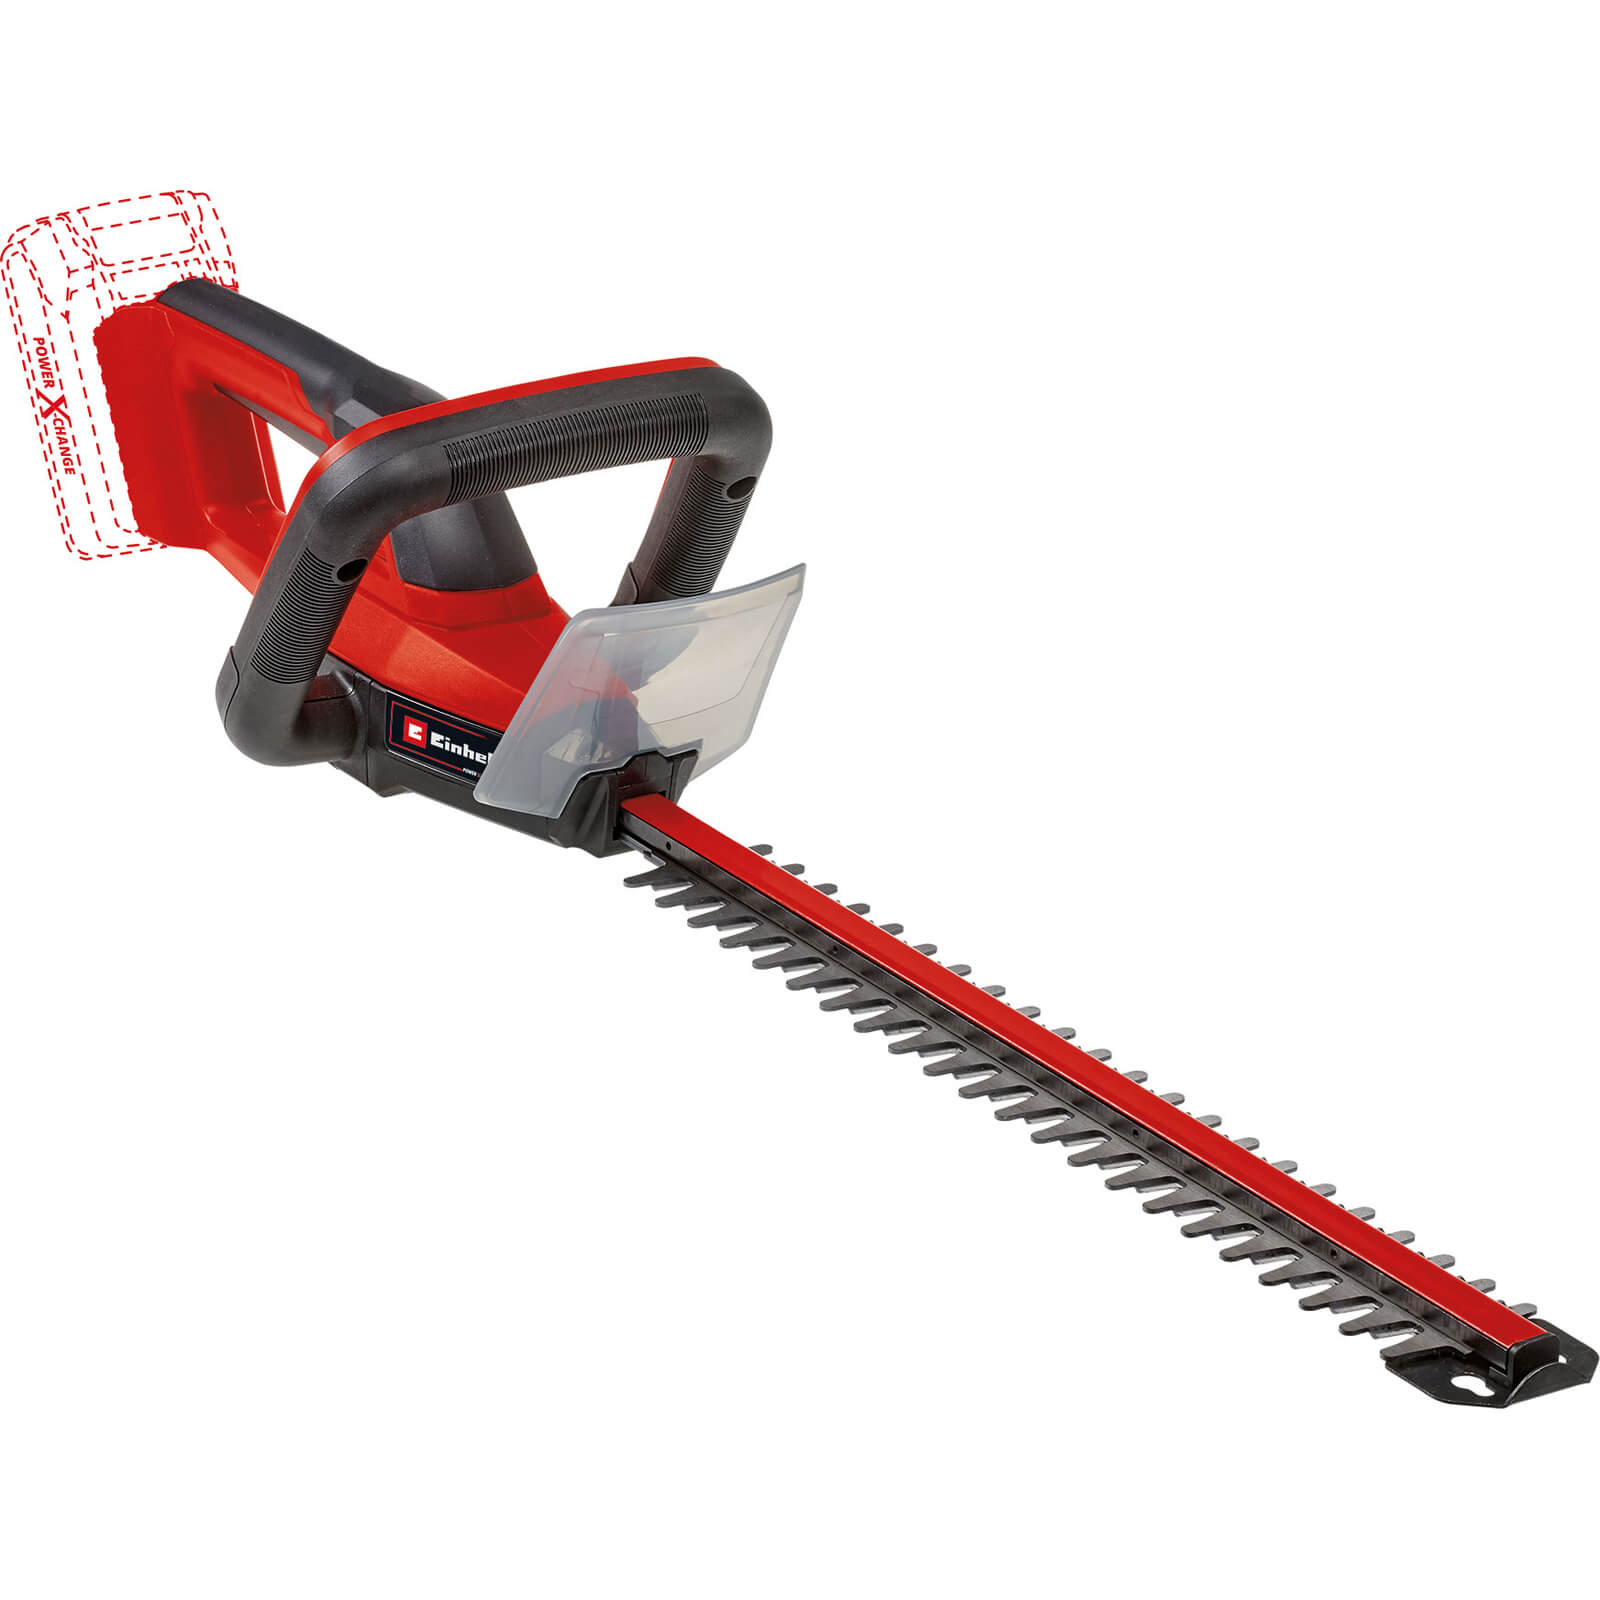 Image of Einhell Garden GC-CH 18/40 Li 18v Cordless Hedge Trimmer 400mm No Batteries No Charger